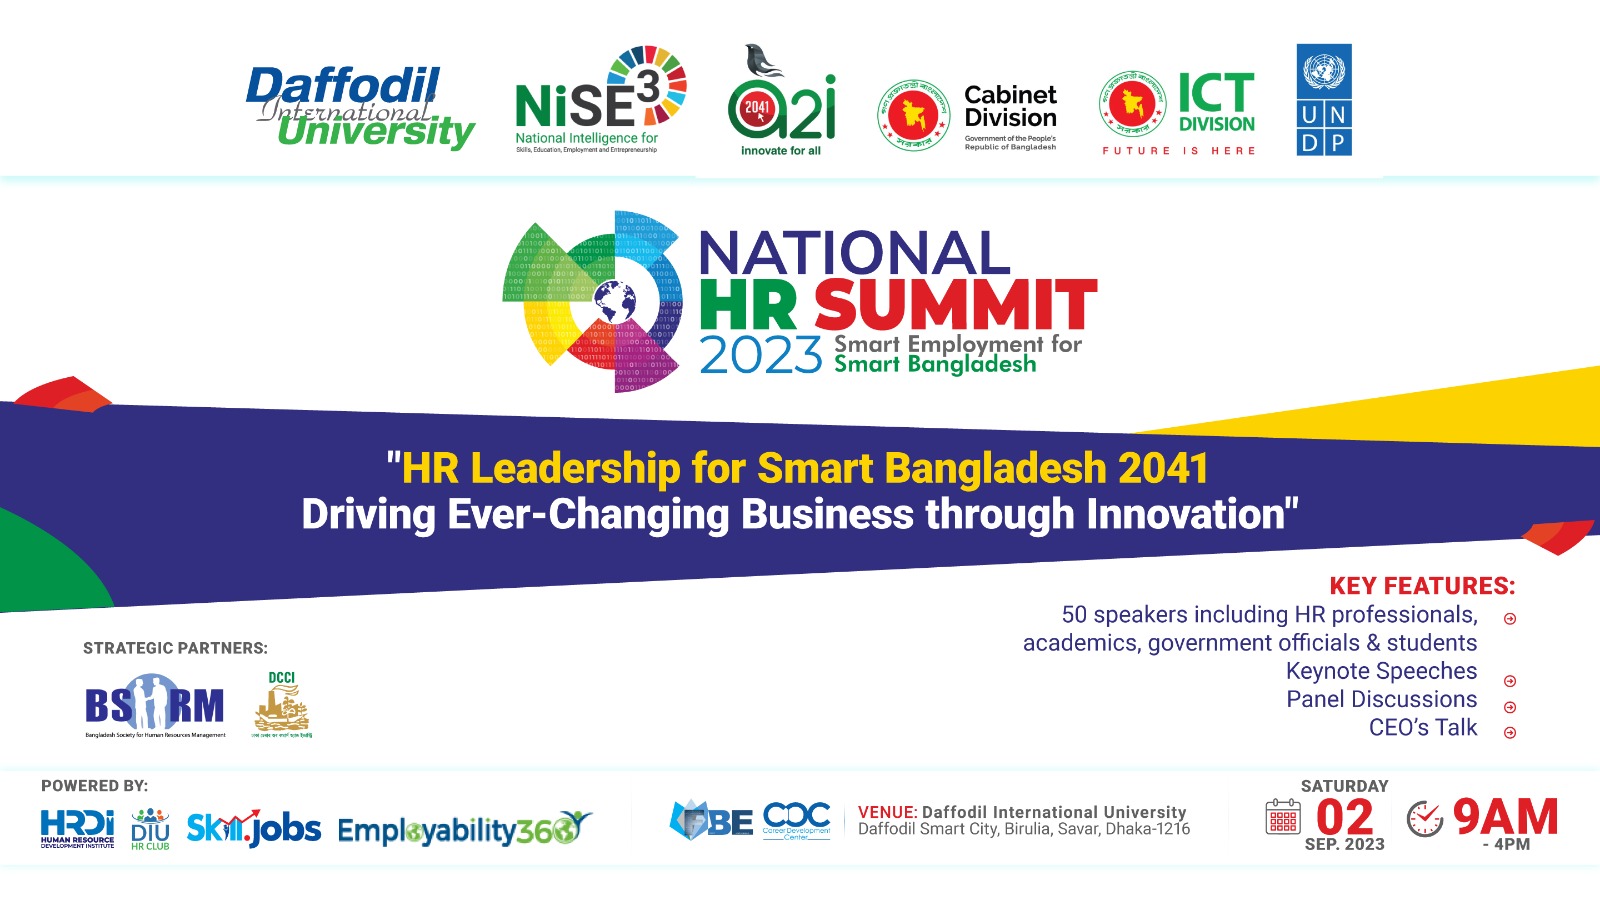 National HR Summit 2023: Paving the Way for a Smarter Bangladesh Workforce